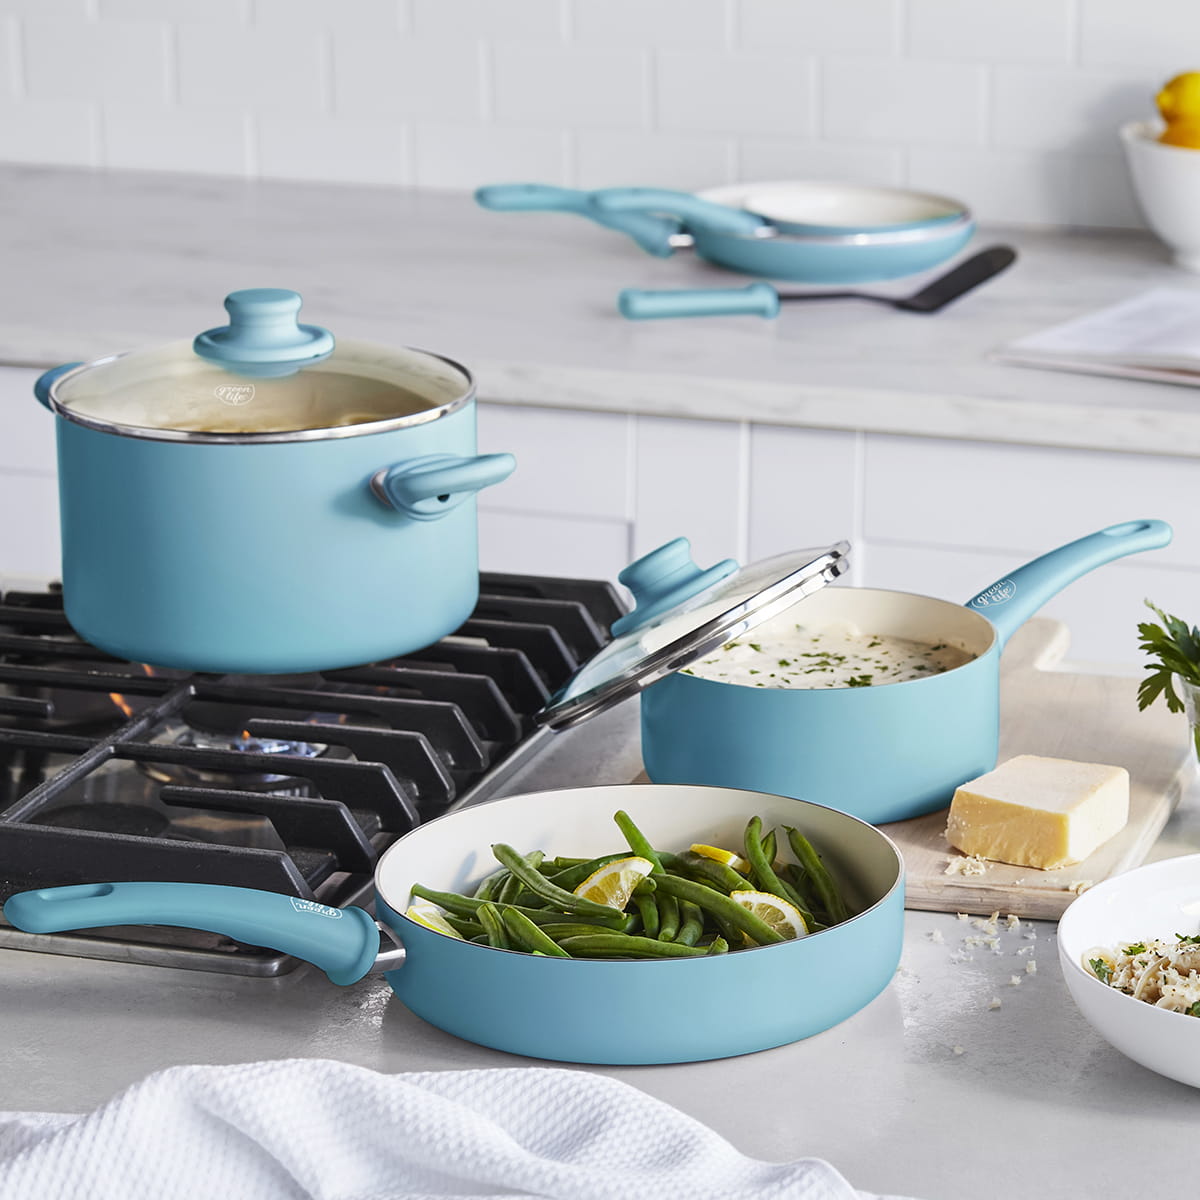 GreenLife Soft Grip Healthy Ceramic Nonstick Blue Cookware Pots and Pans Set, 12-Piece